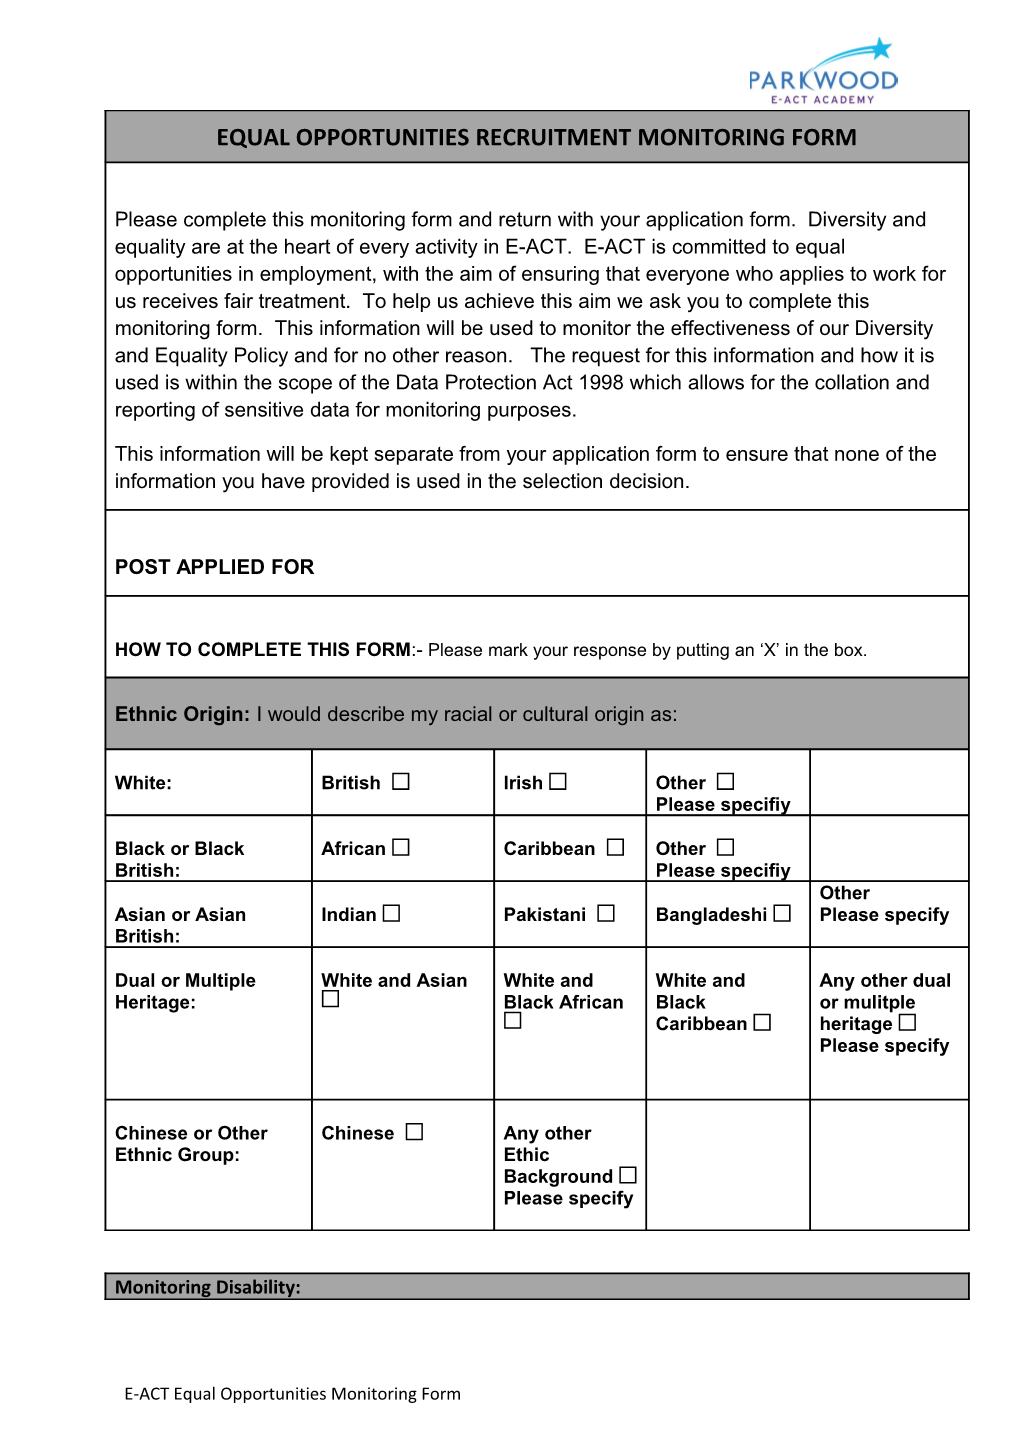 E-ACT Equal Opportunities Monitoring Form